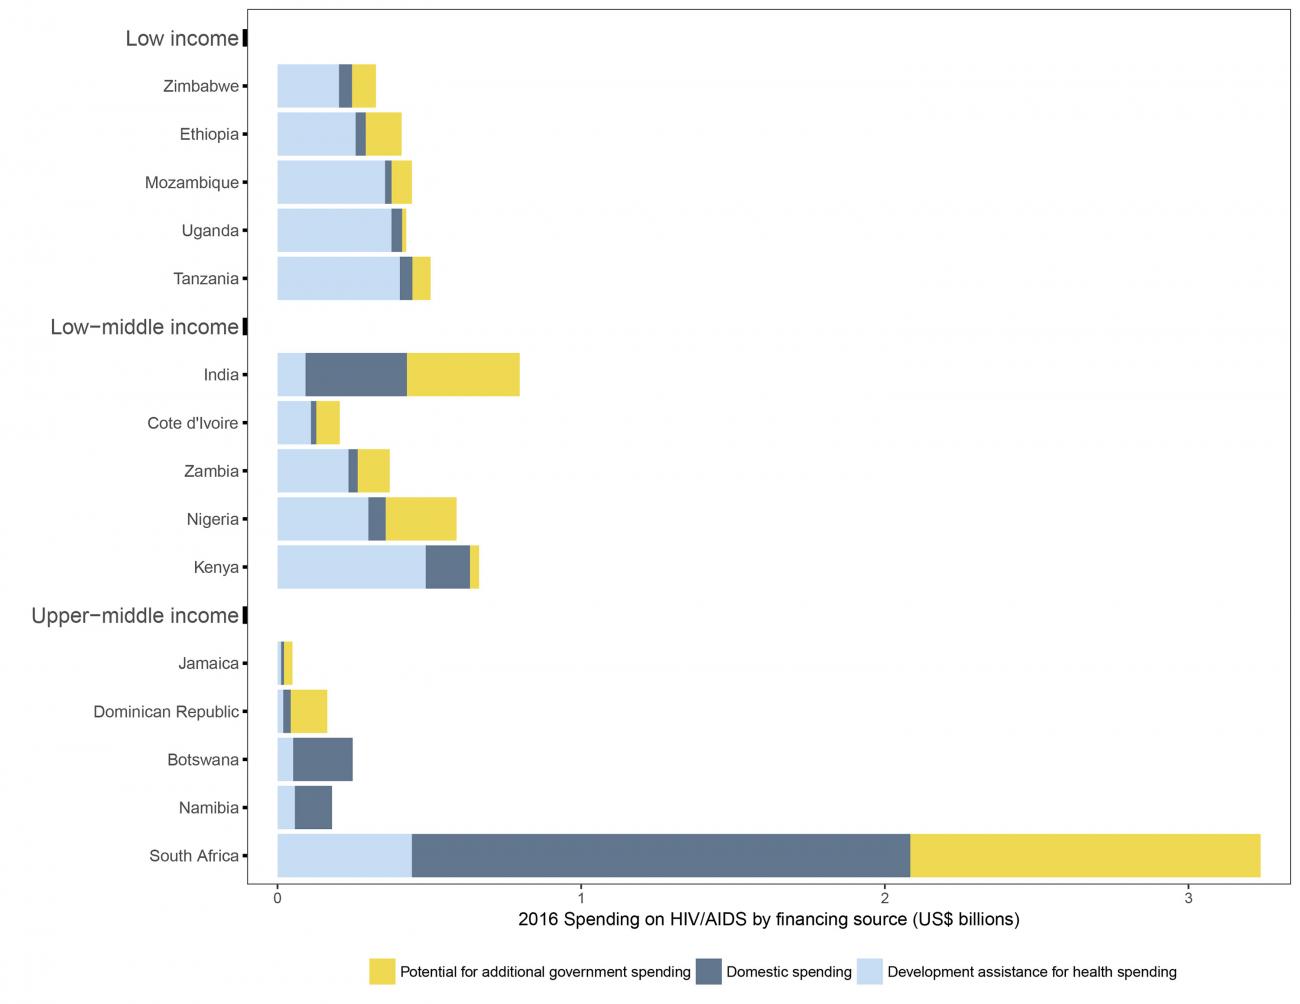 Breakdown of spending for HIV/AIDS among the top recipients of donor funding.